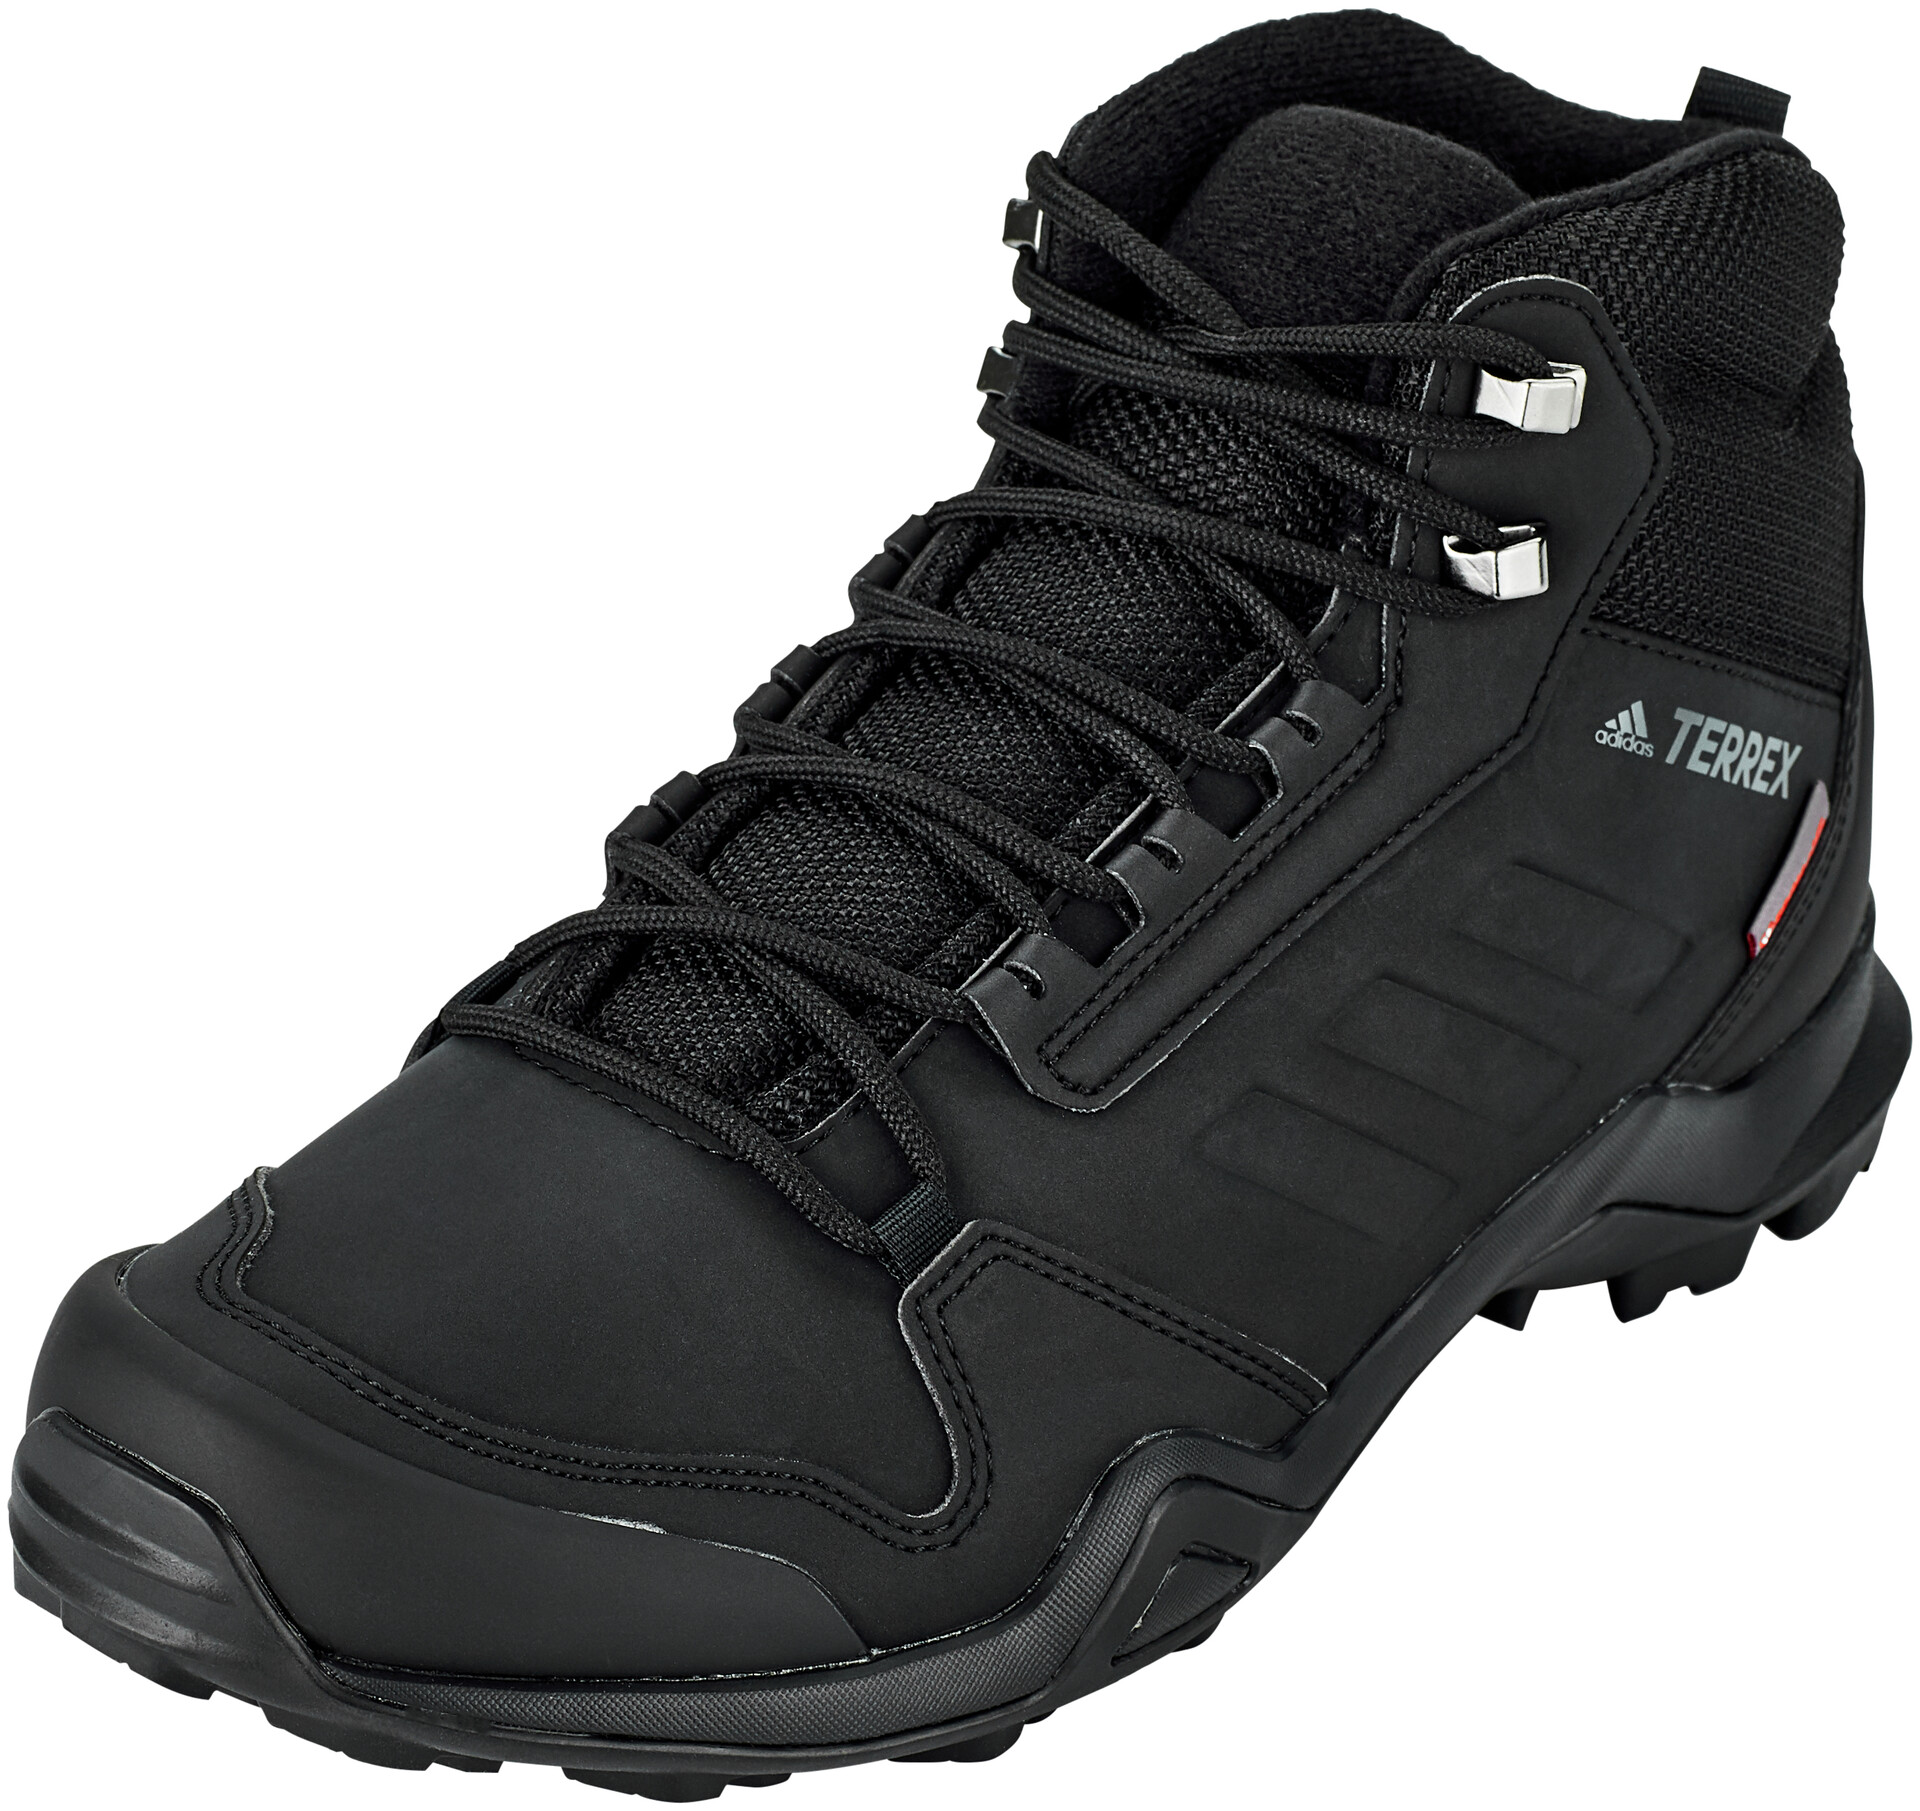 terrex ax3 hiking shoes review